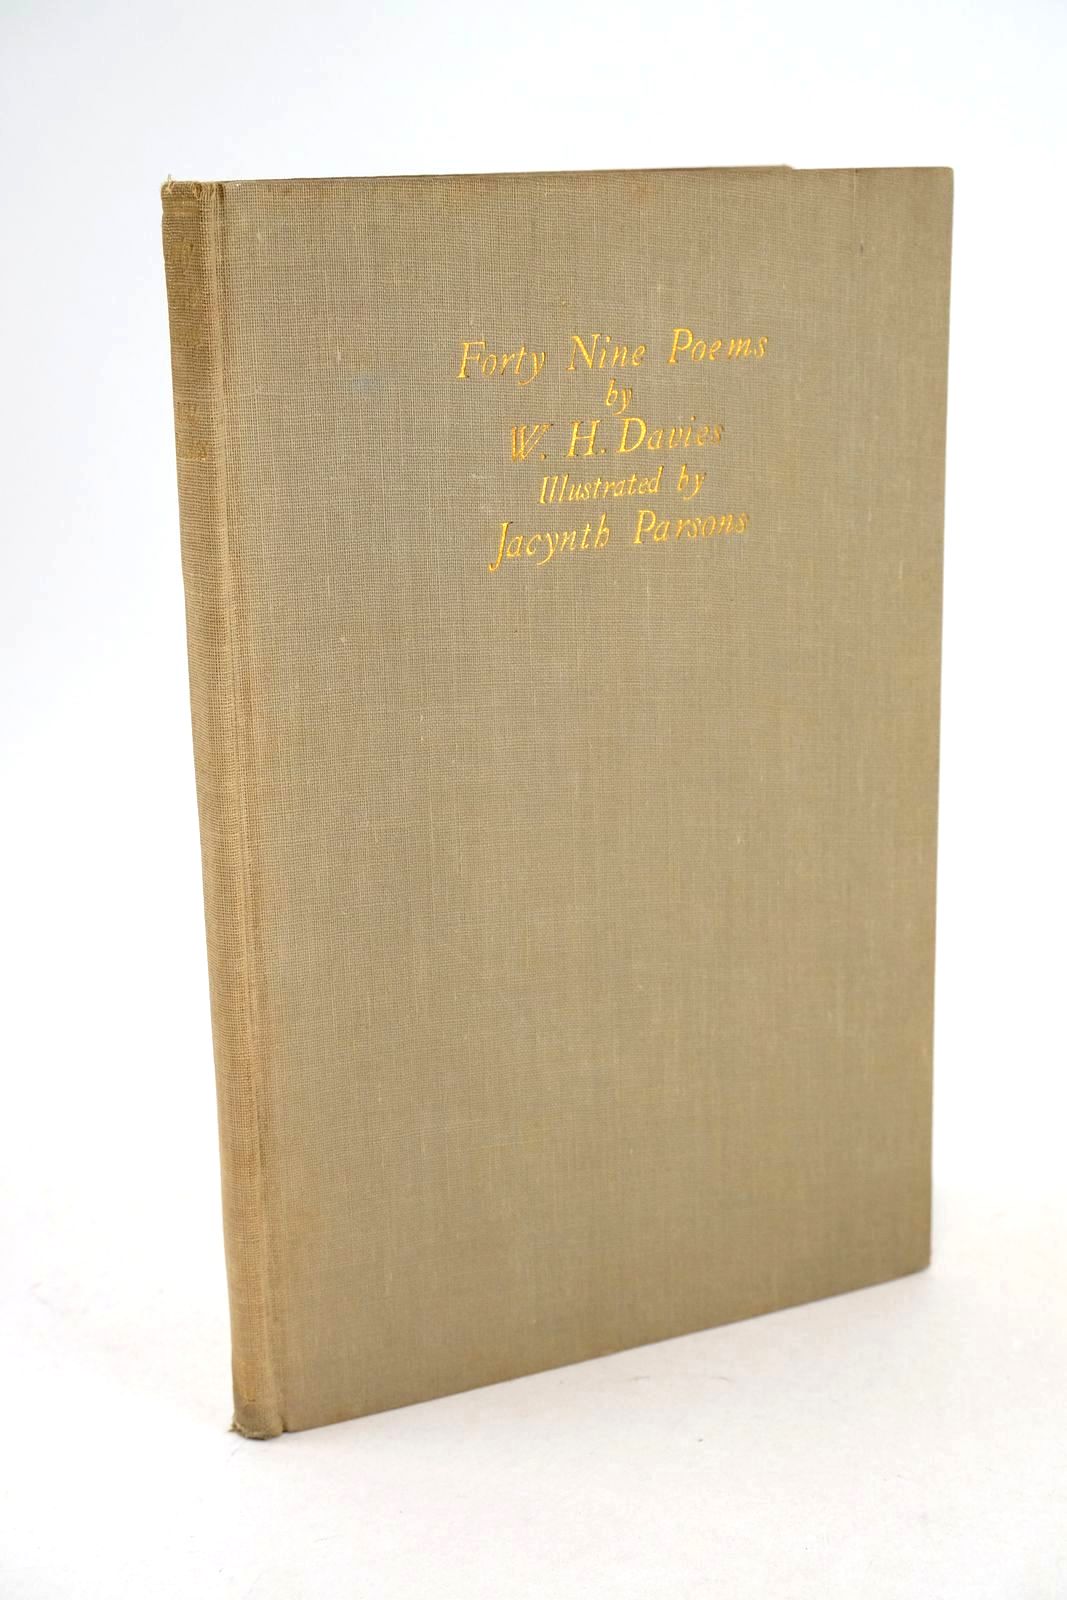 Photo of FORTY-NINE POEMS BY W.H. DAVIES written by Davies, W.H. illustrated by Parsons, Jacynth published by The Medici Society (STOCK CODE: 1326252)  for sale by Stella & Rose's Books